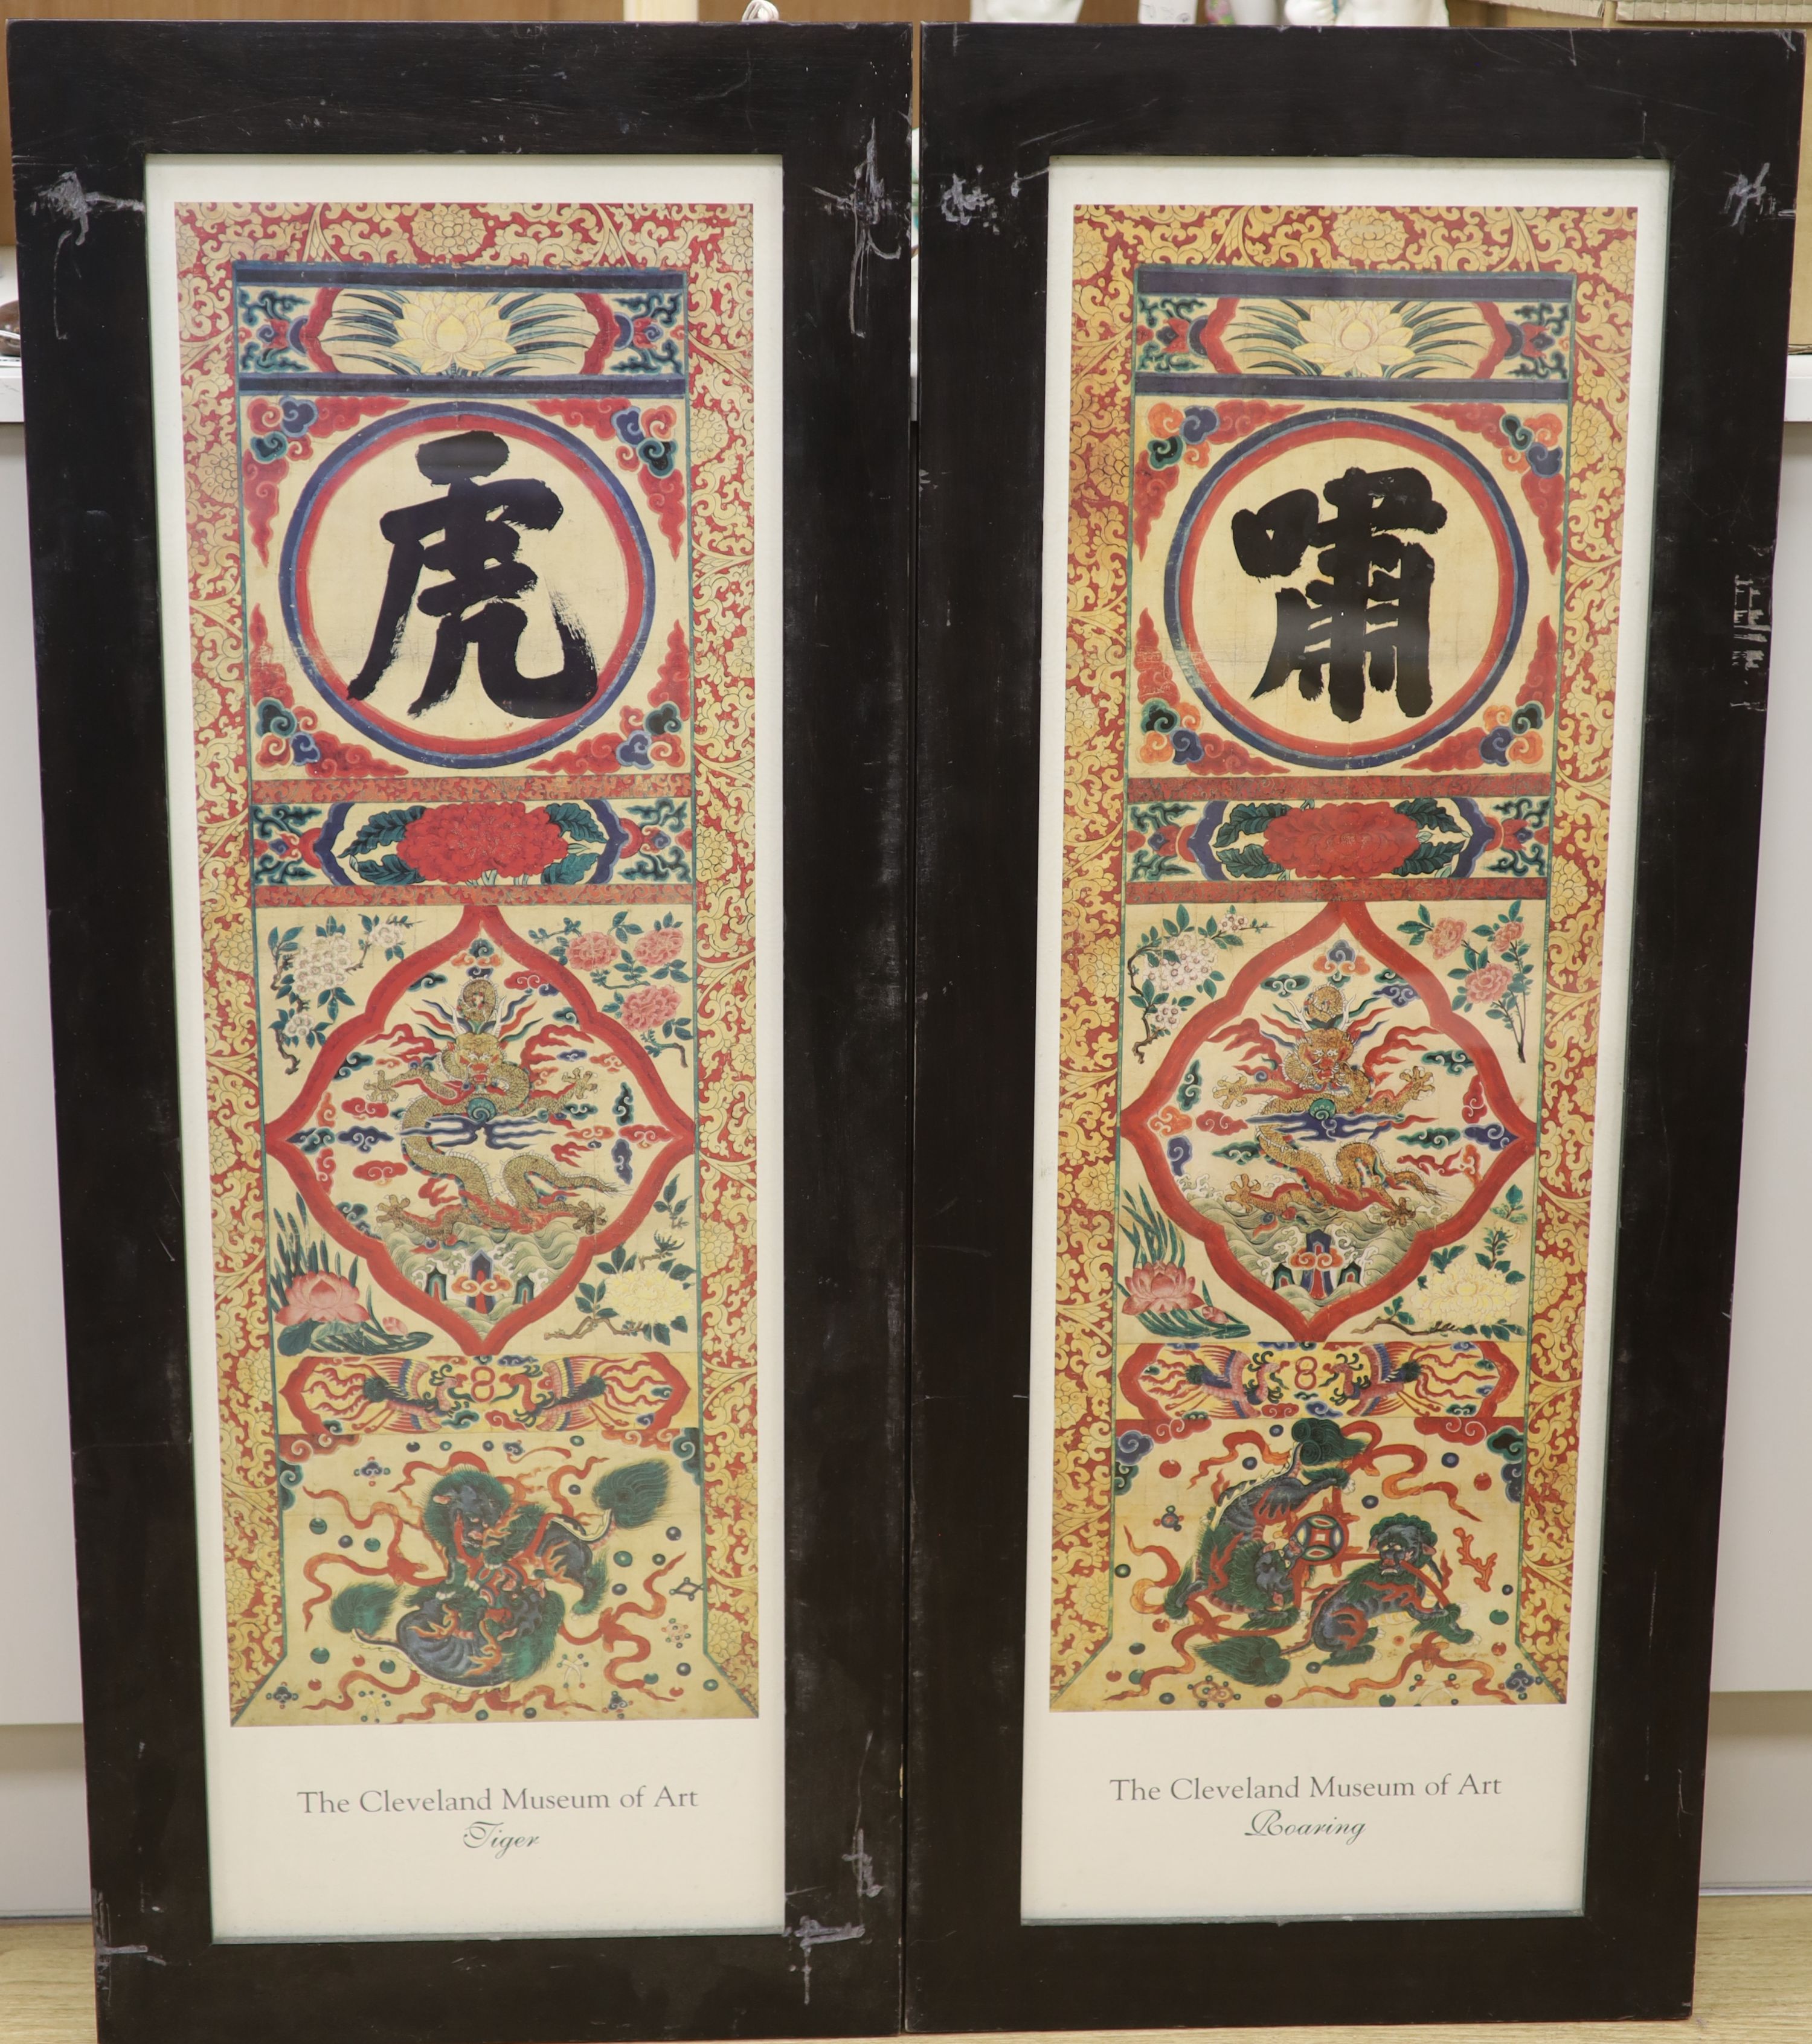 Two framed Cleveland Museum of Art colour prints of Chinese murals, Roaring and Tiger, 94 x 30cm